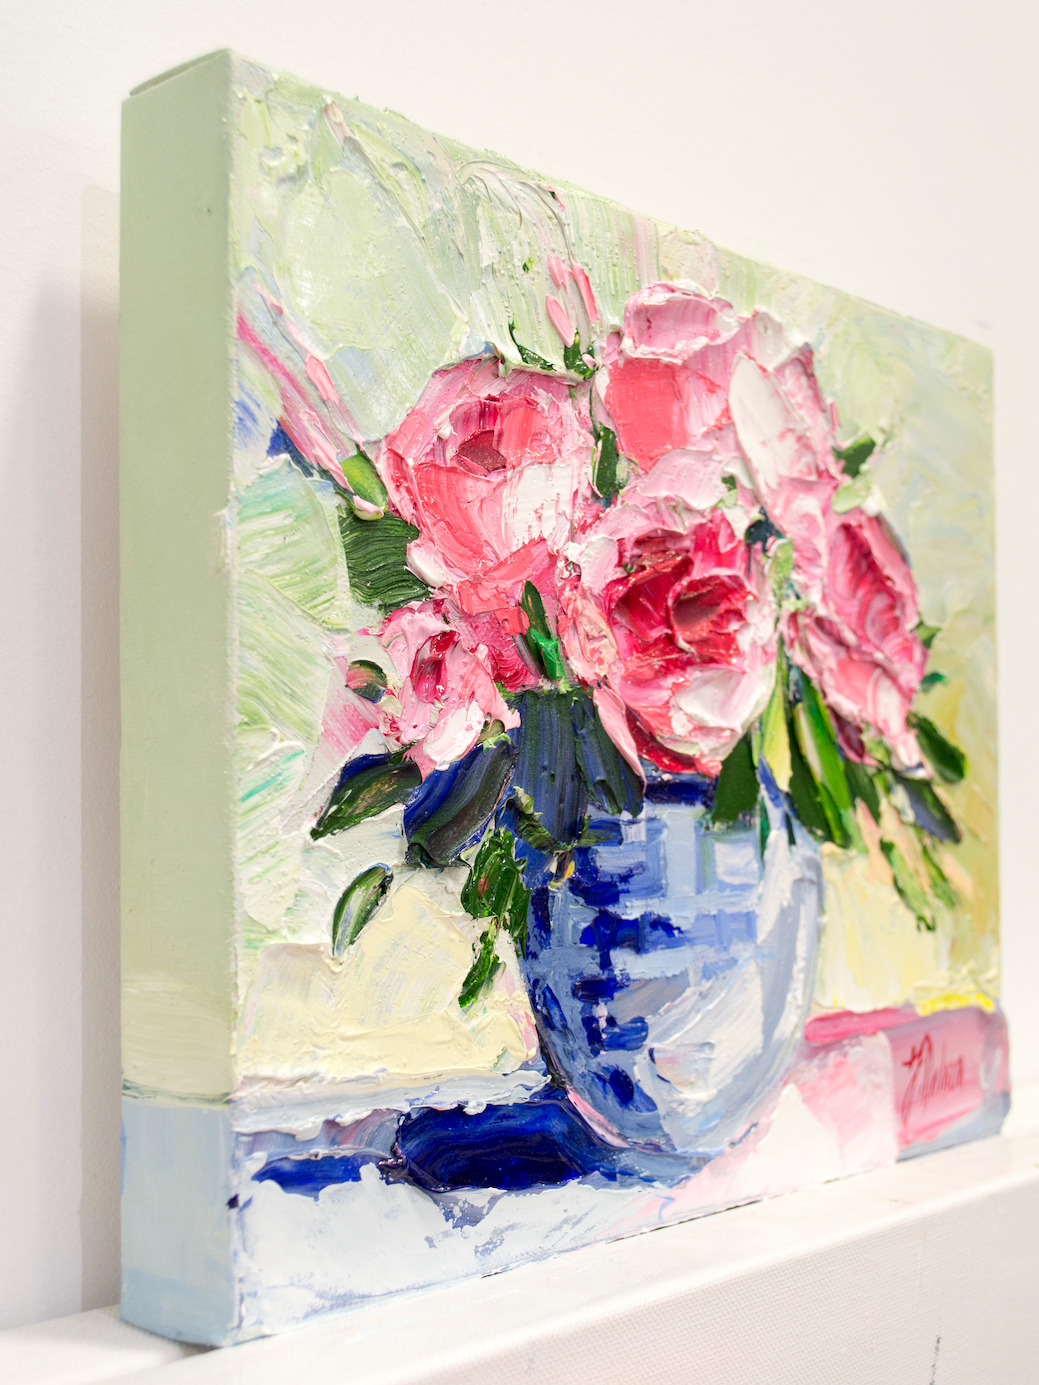 Left View Of Still Life Painting "Peonies in Ginger Jar" By Judith Dalozzo